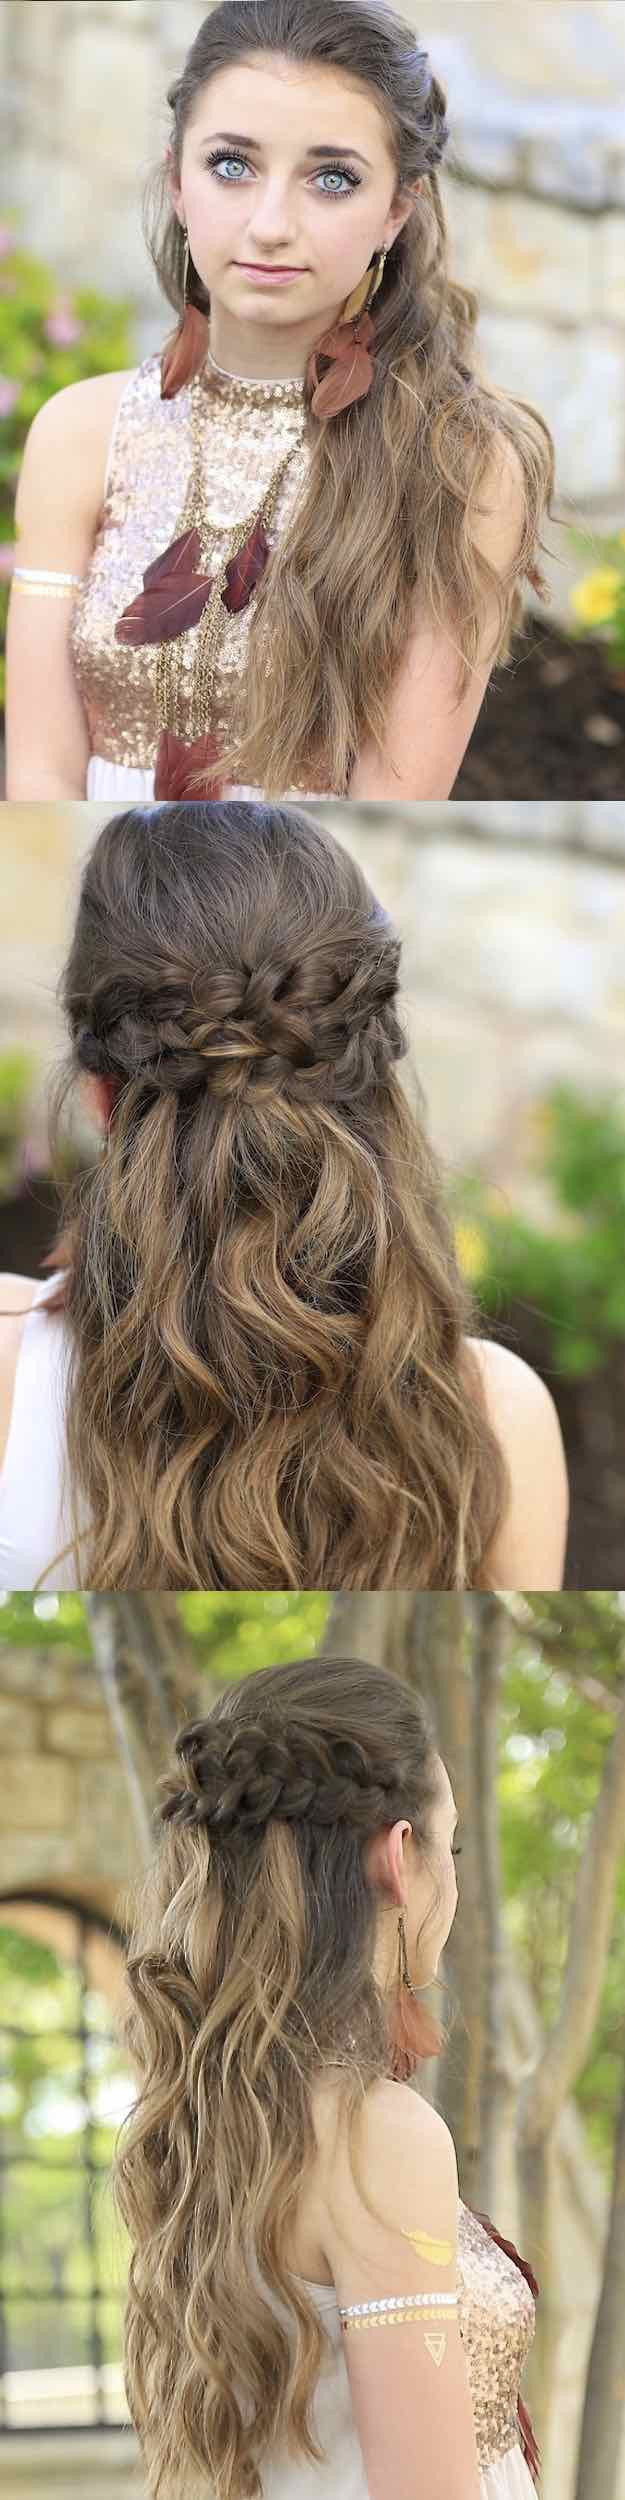 Prom Hairstyles Half Updos
 25 Easy Half Up Half Down Hairstyle Tutorials For Prom